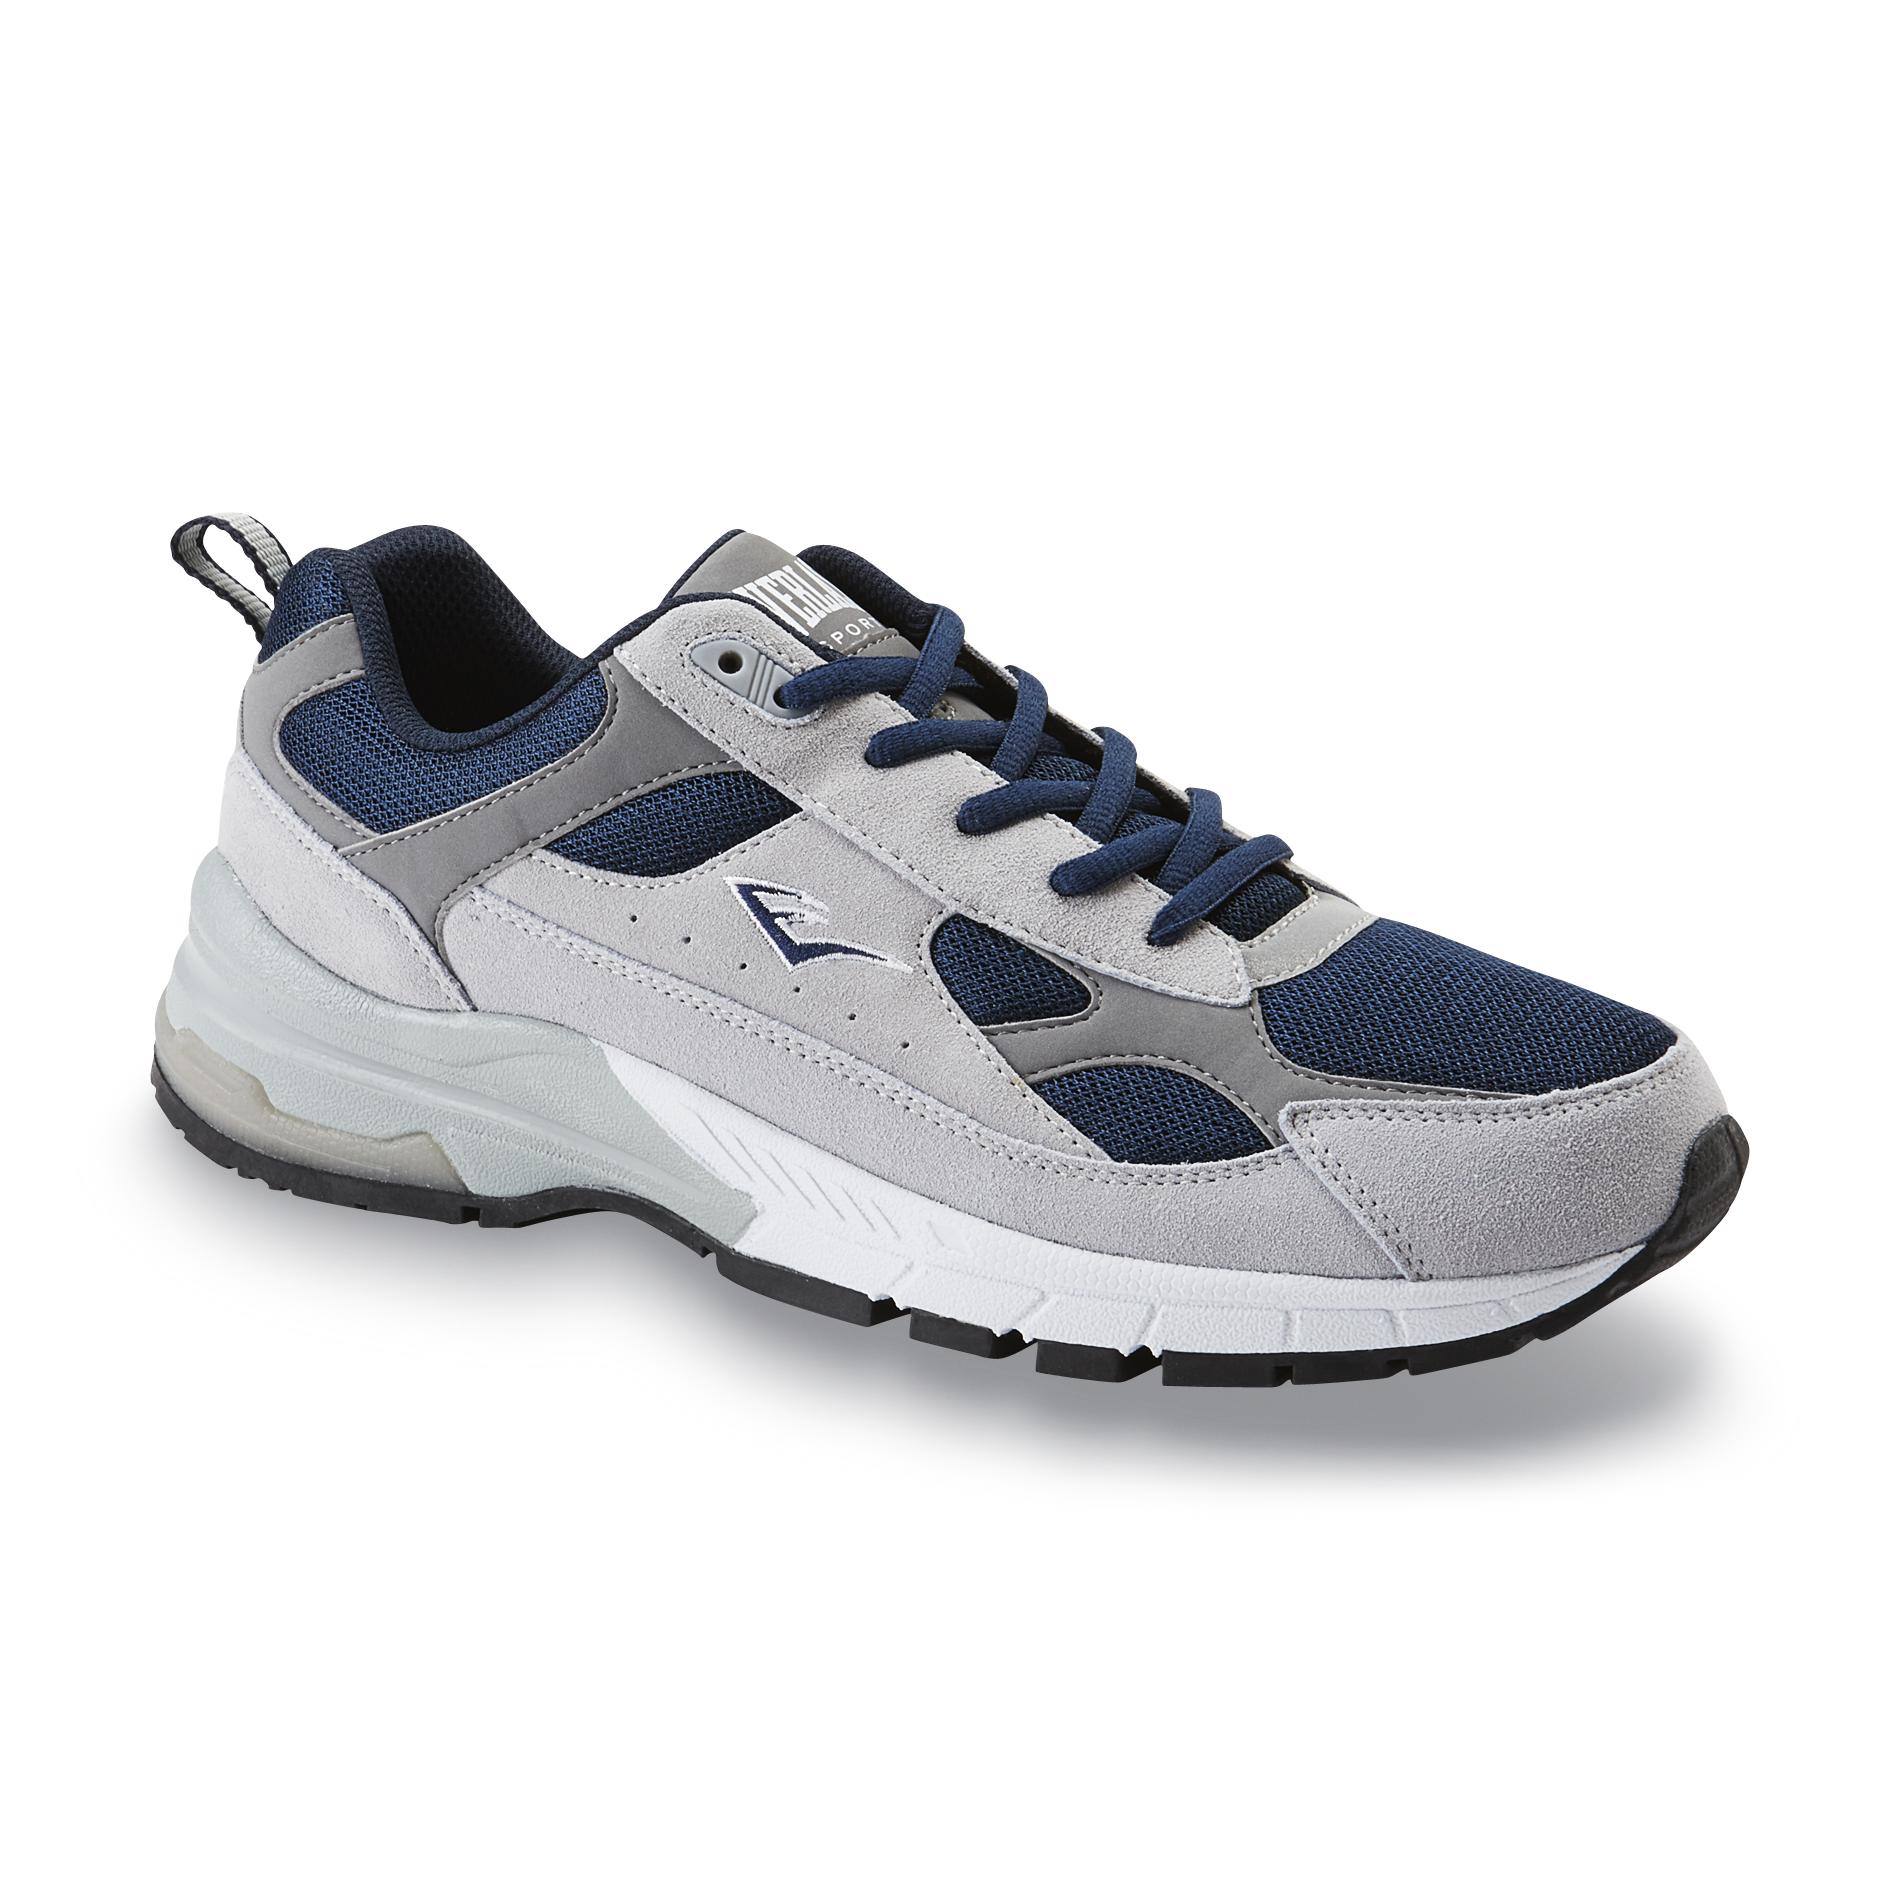 Everlast® Sport Men's Athletic Shoe Lincoln Lace-up Gray/Navy - Shoes ...